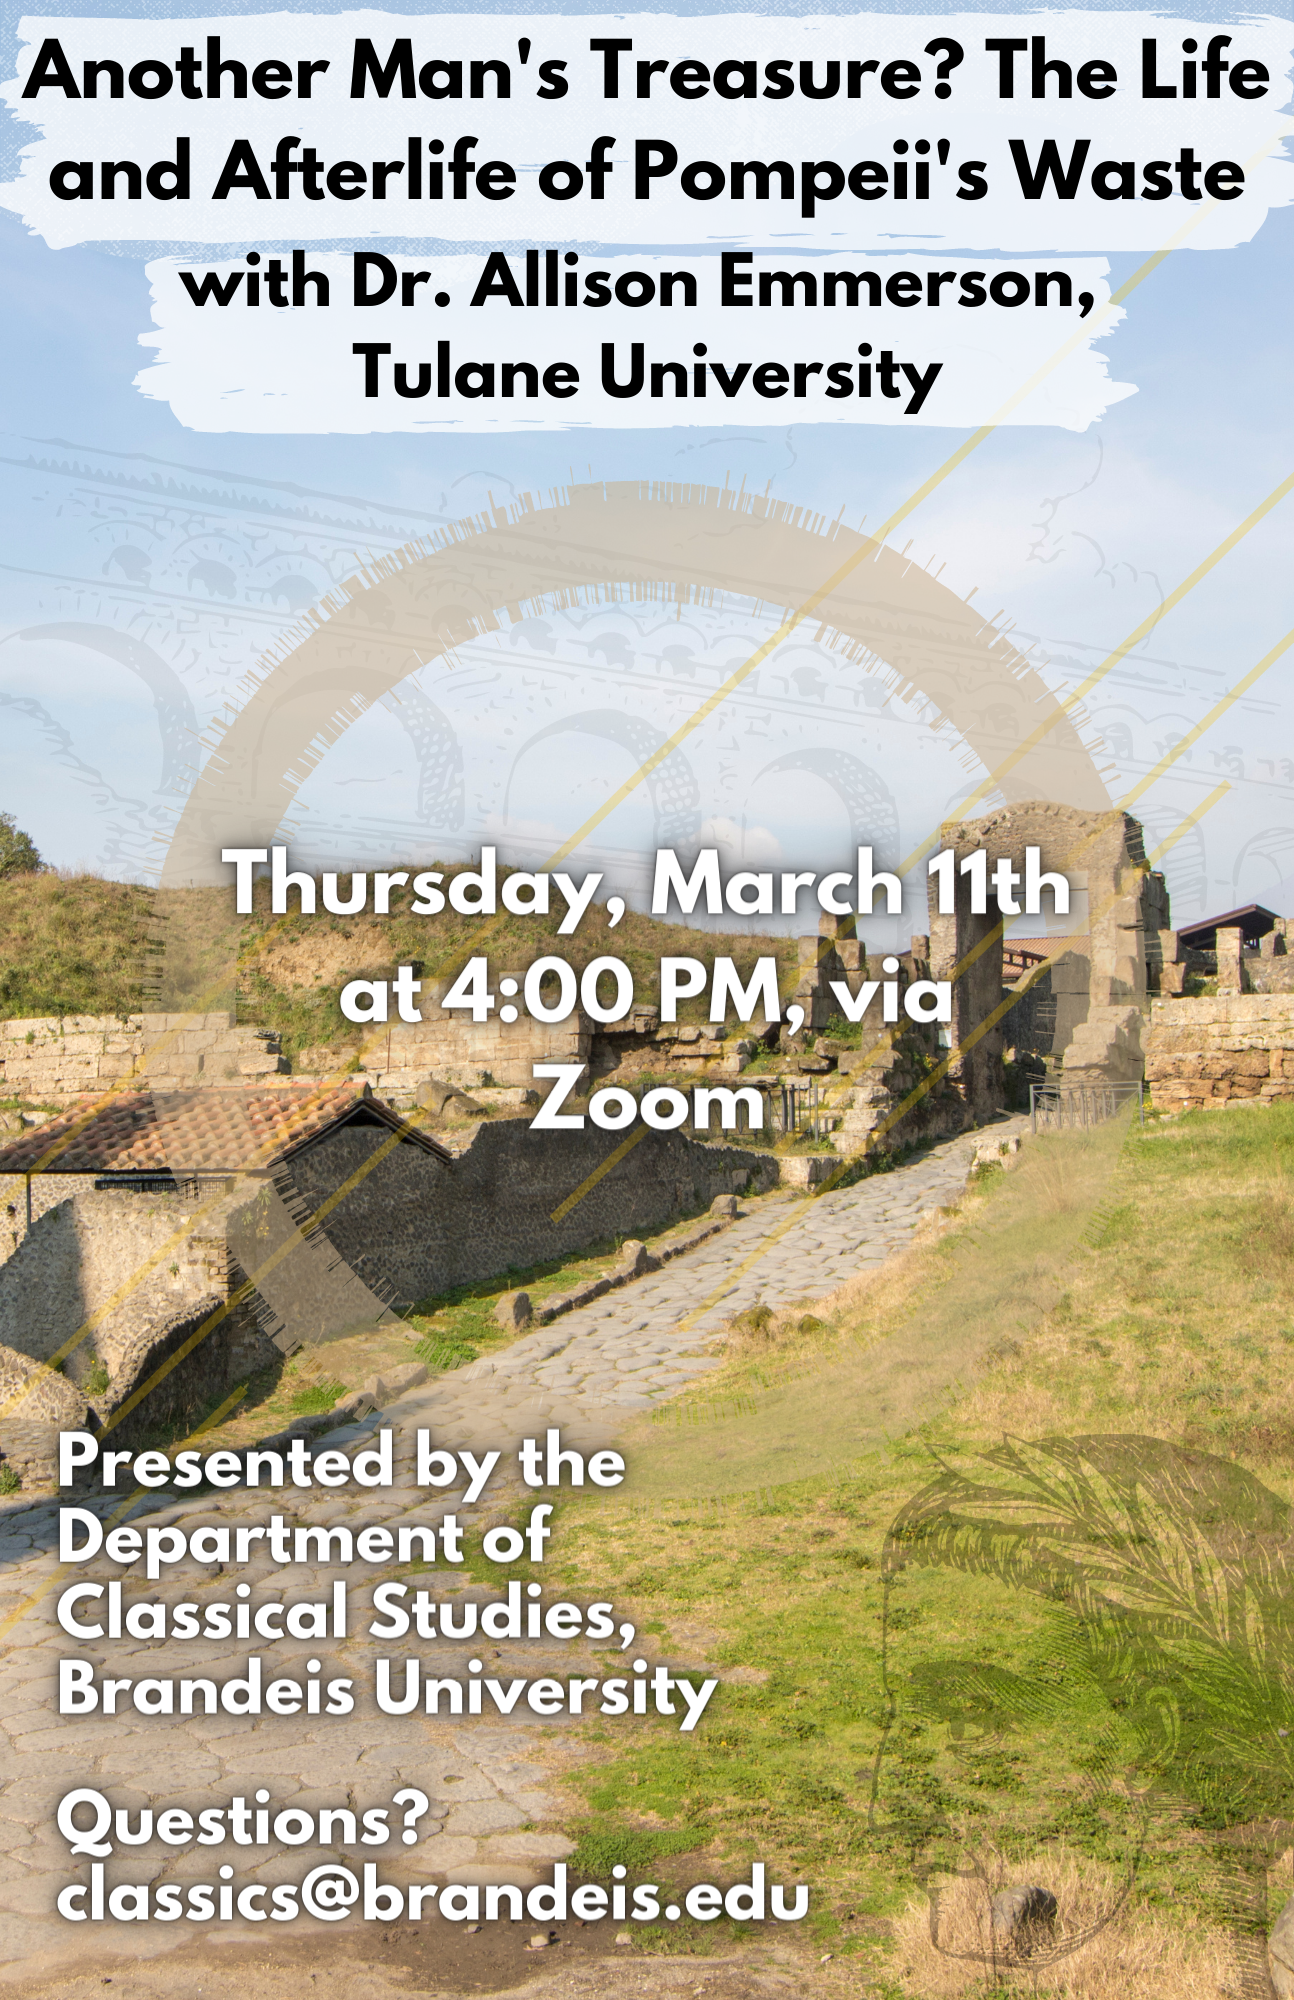 Digital Flyer for "Another Man's Treasure? The Life and Afterlife of Pompeii's Waste" with Dr. Allison Emmerson, Tulane University